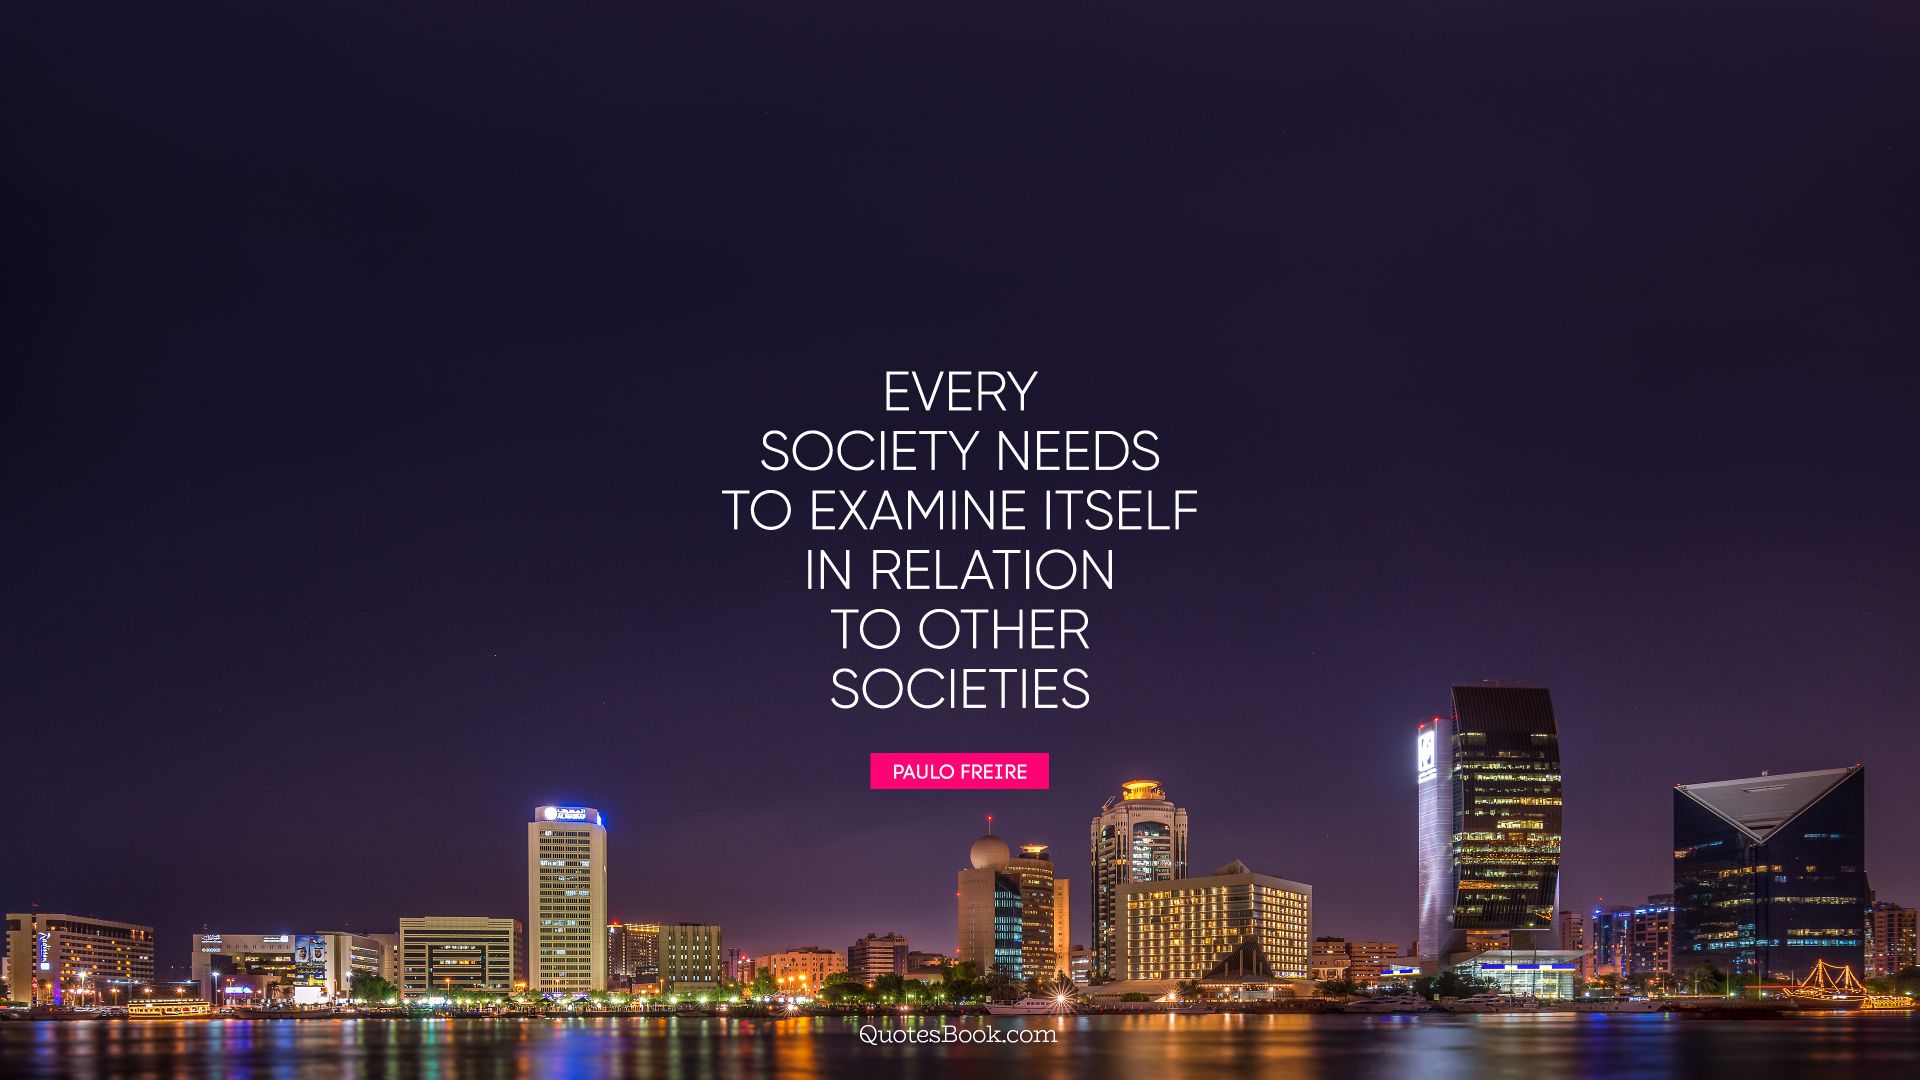 Every society needs to examine itself in relation to other societies. - Quote by Paulo Freire